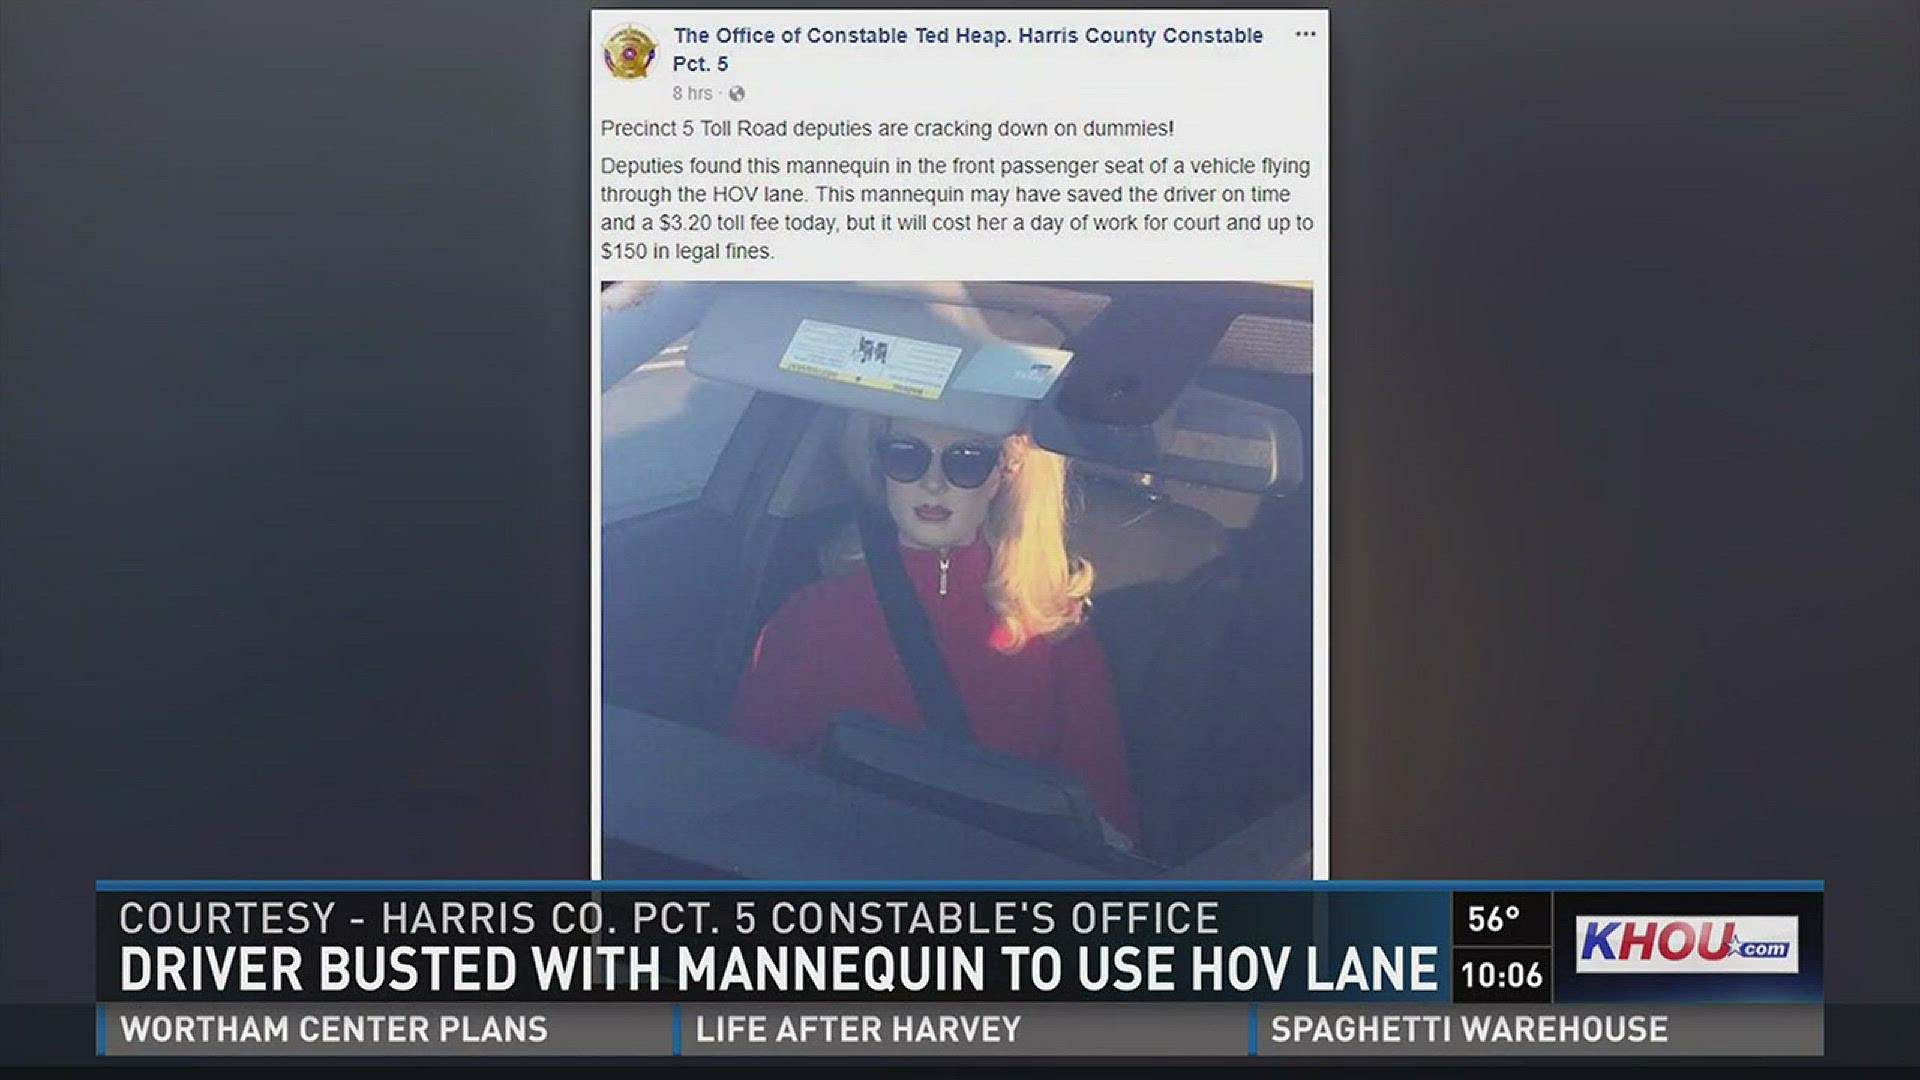 The hot blonde in the passenger seat of a vehicle on the HOV lane Thursday turned out to be a real dummy. And no, this isn't a dumb blonde joke. She was a REAL dummy.